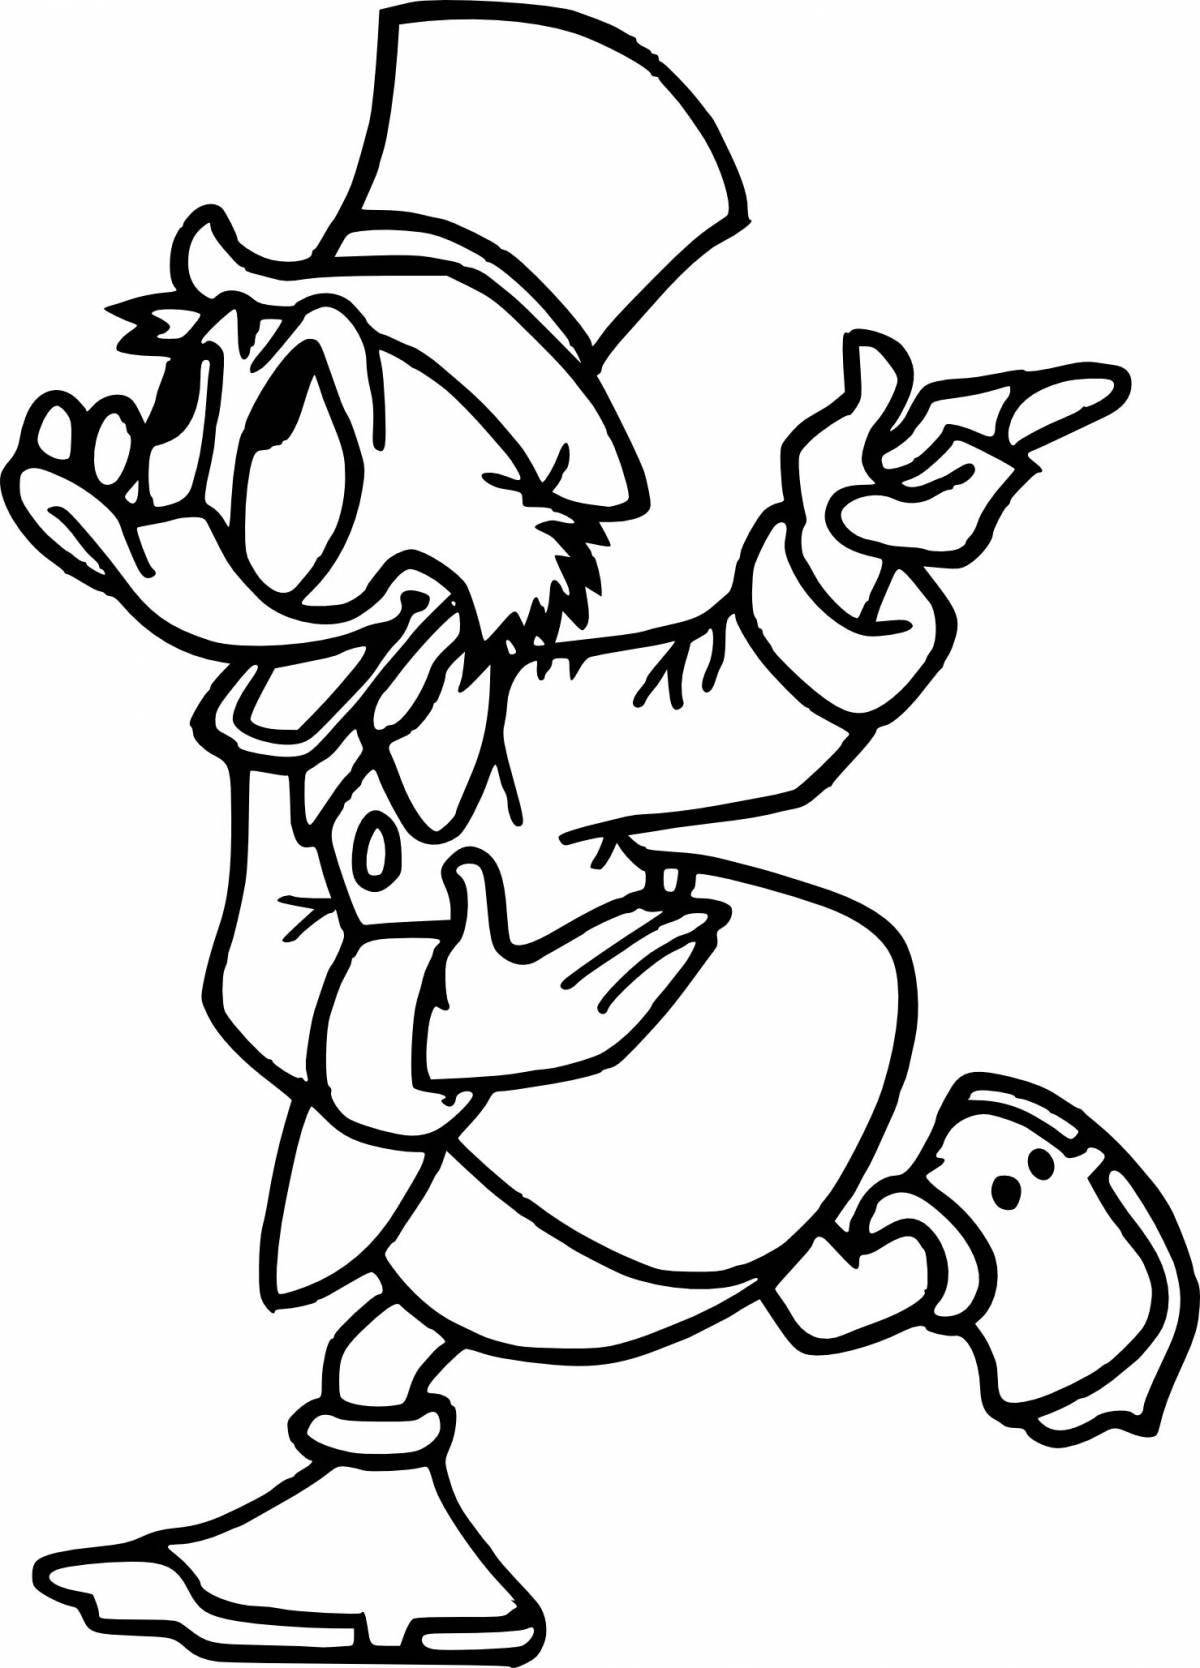 Gorgeous Twist McDuck coloring page